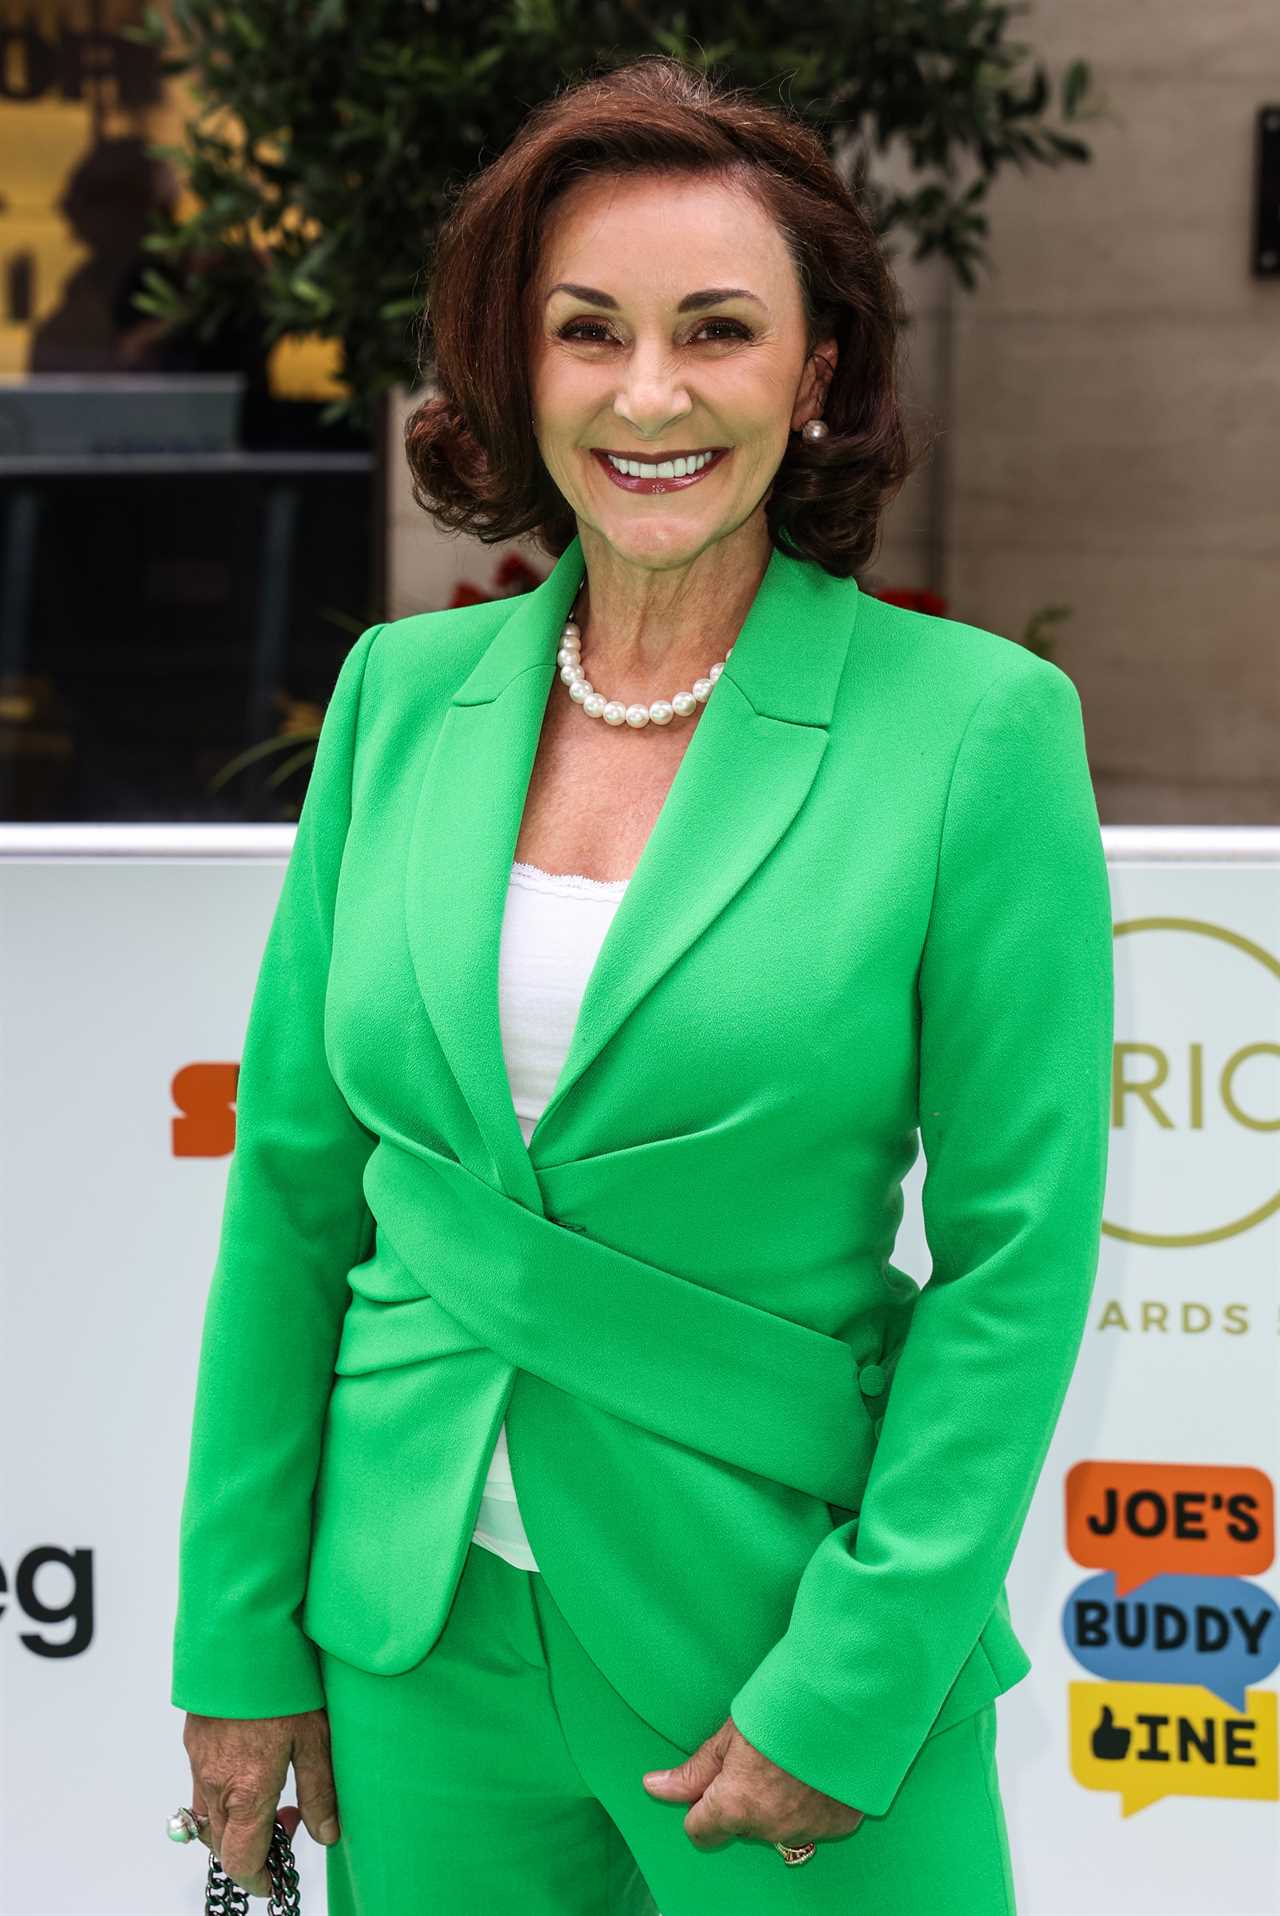 Shirley Ballas Defies BBC Ban on Supporting Giovanni Pernice